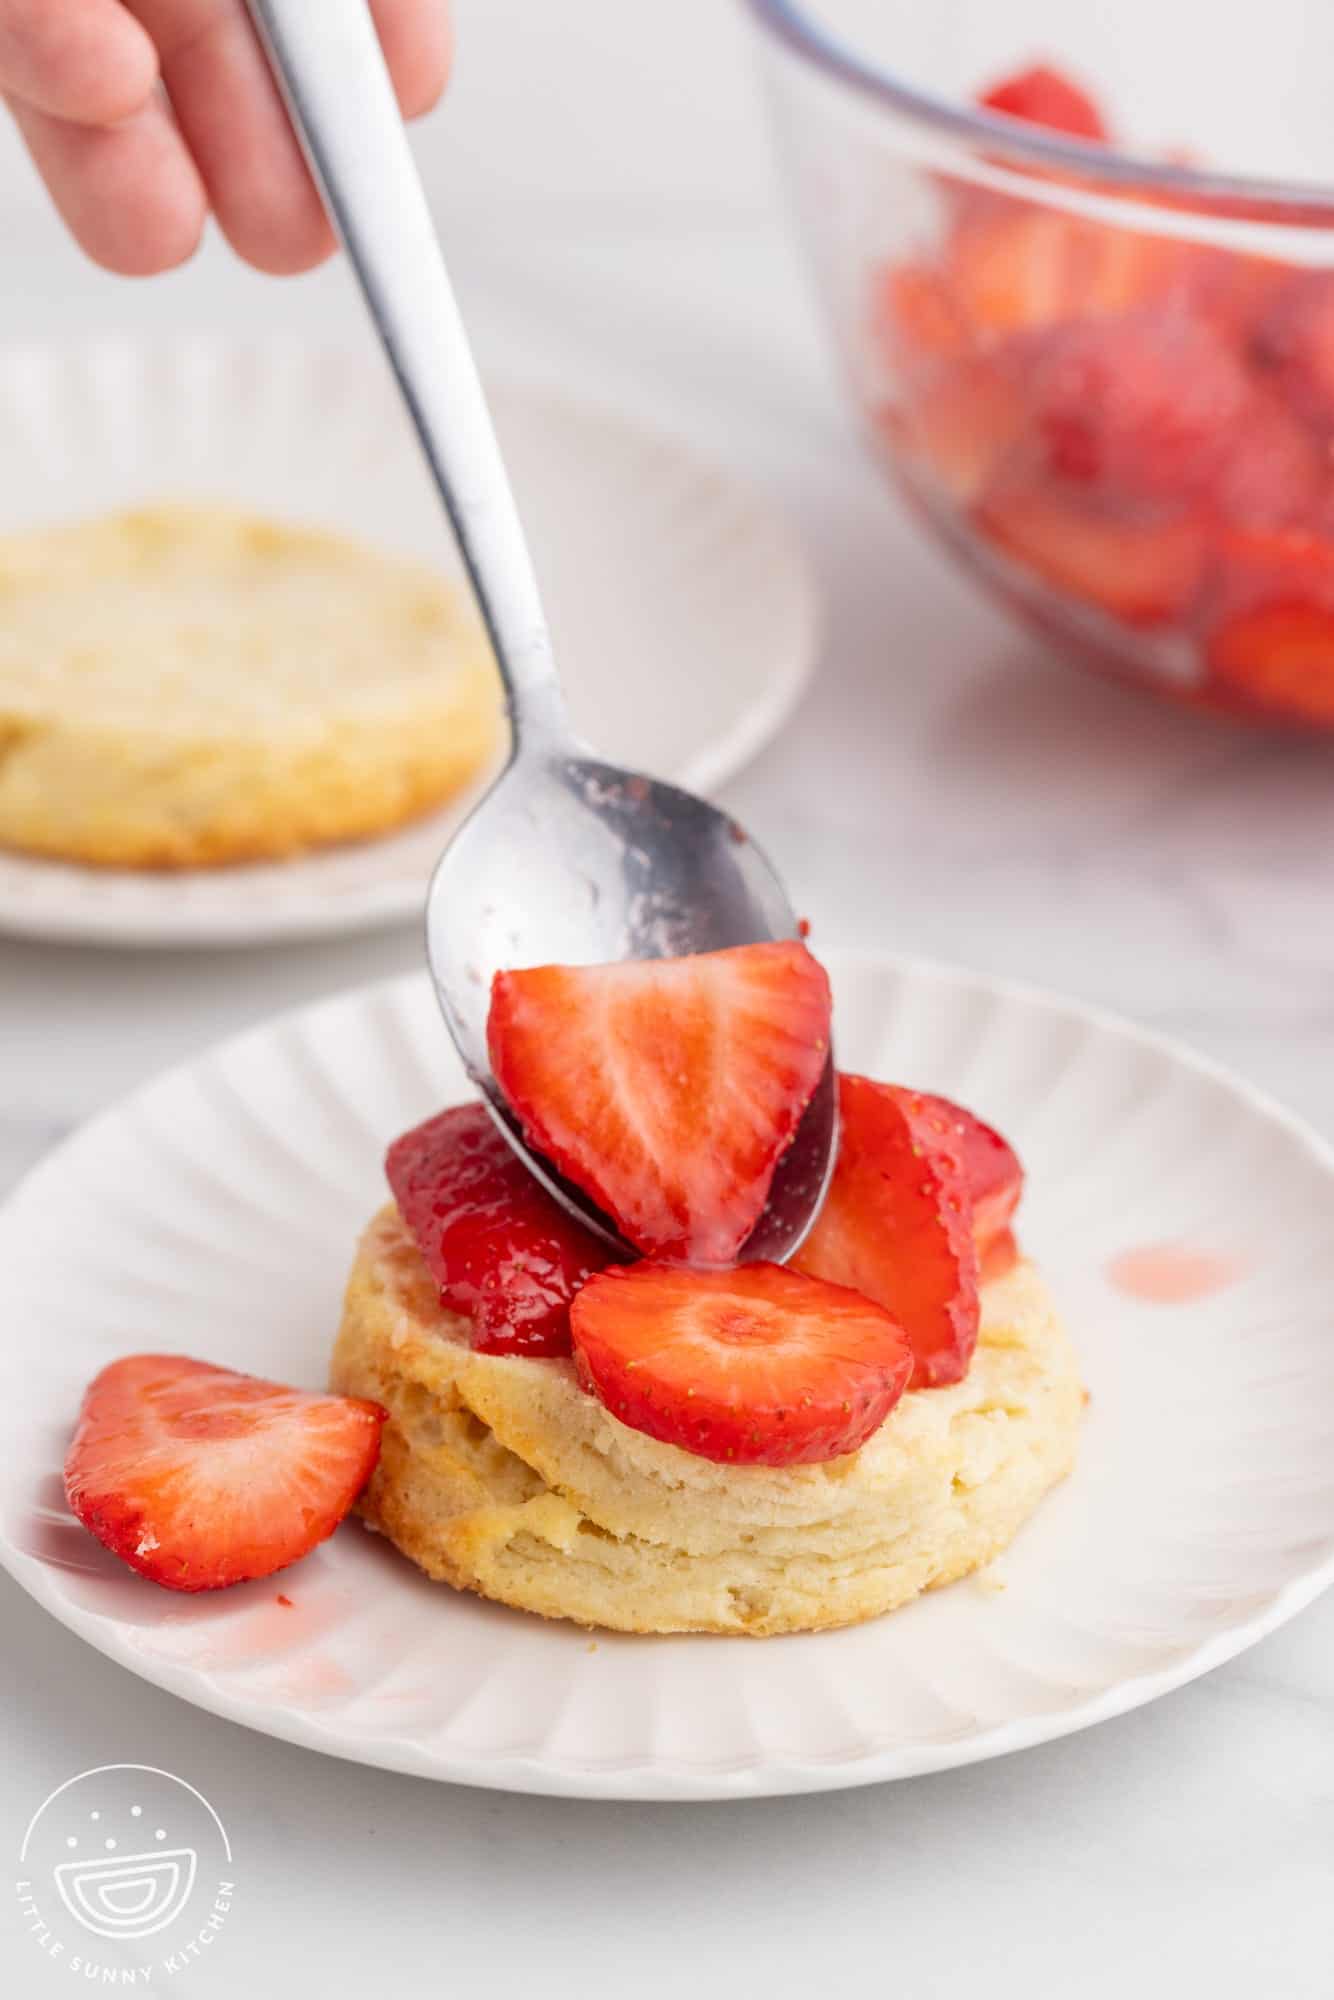 Spooning macerated strawberries over homemade biscuits